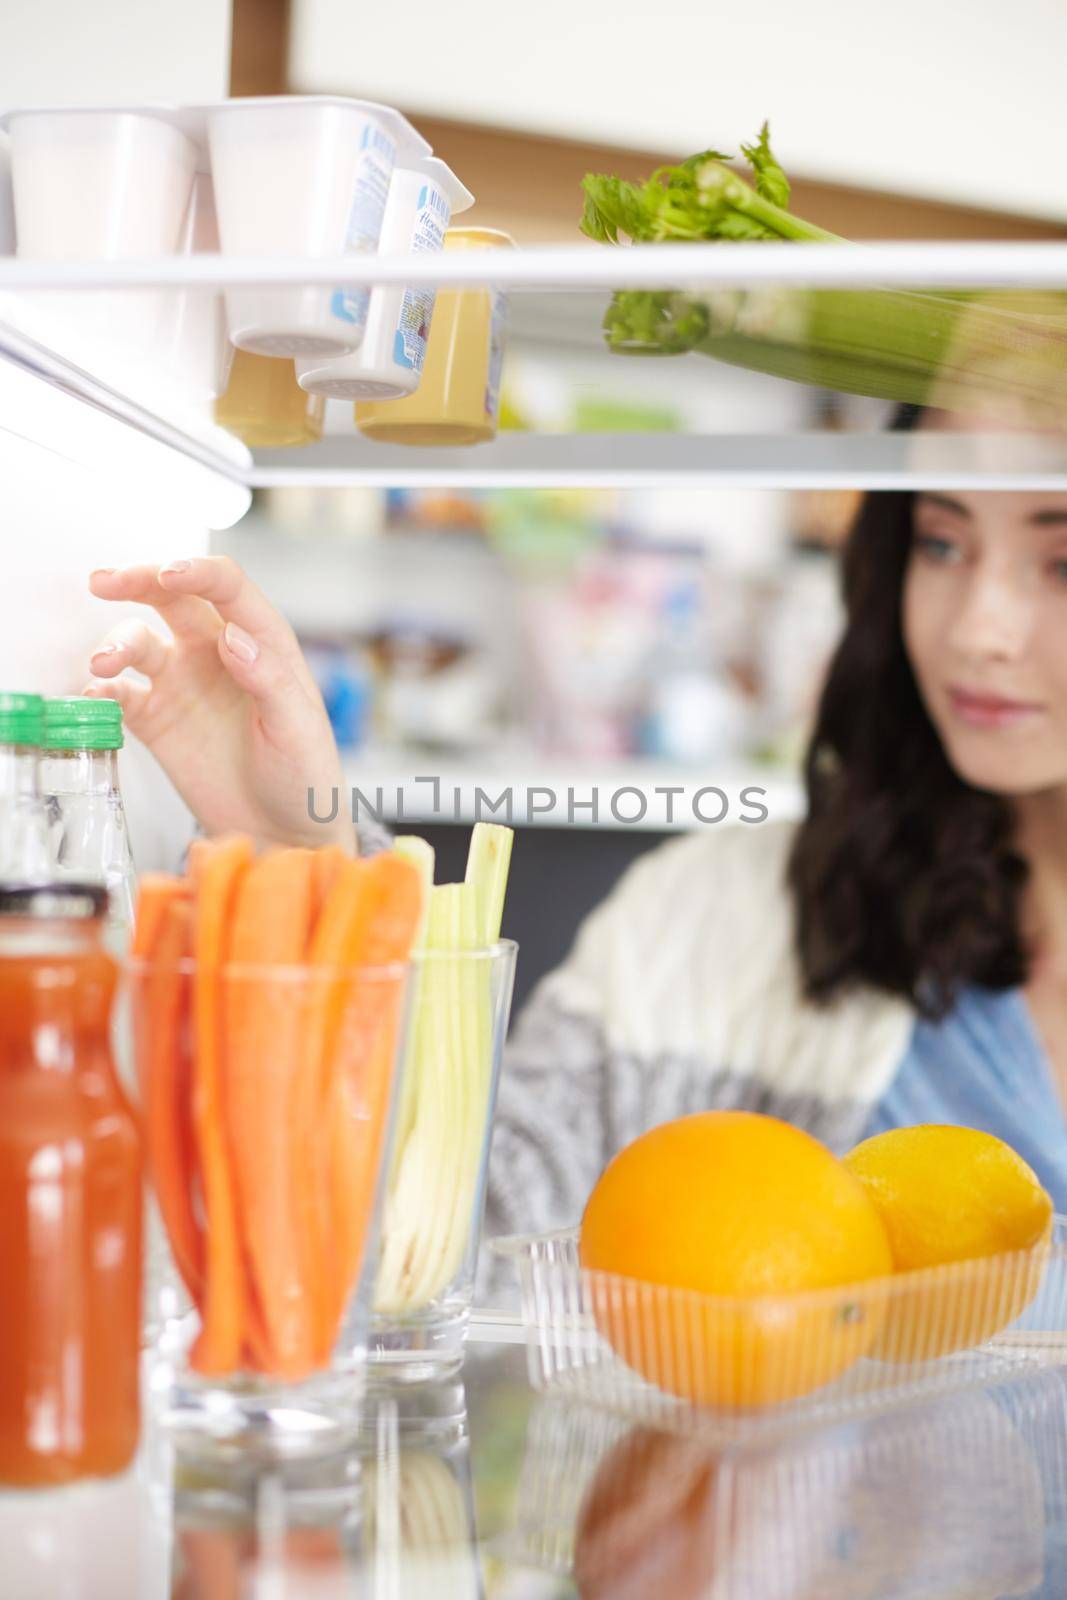 Open refrigerator with fresh fruits and vegetable. Open refrigerator.